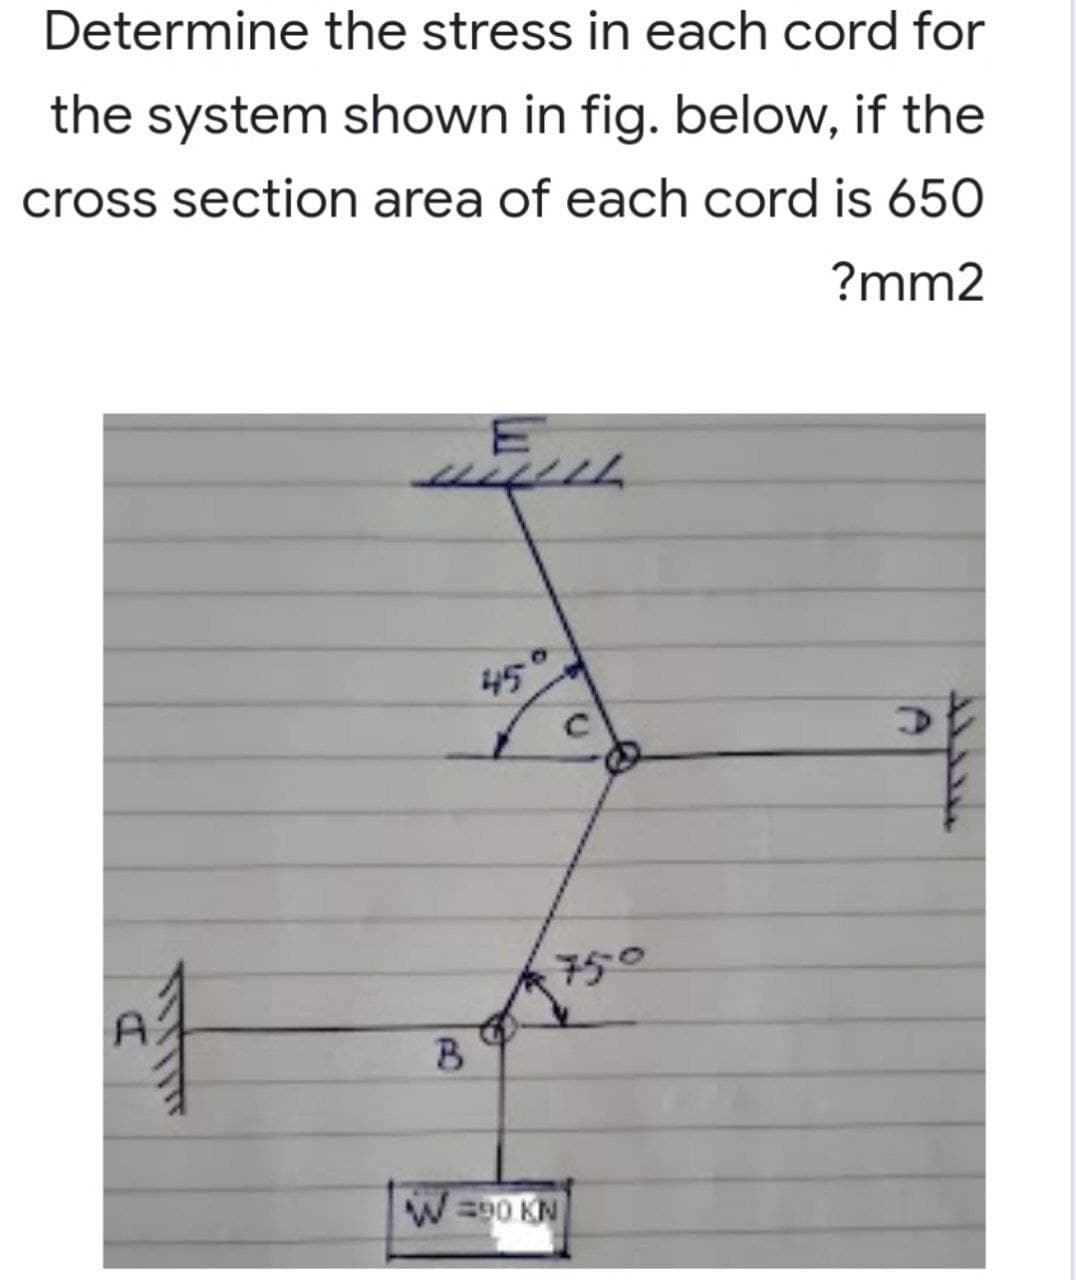 Determine the stress in each cord for
the system shown in fig. below, if the
cross section area of each cord is 650
?mm2
WELL
45
D
SUTTIT
750
B
W=90 KN
D
ܝܝܪܠܠܛ